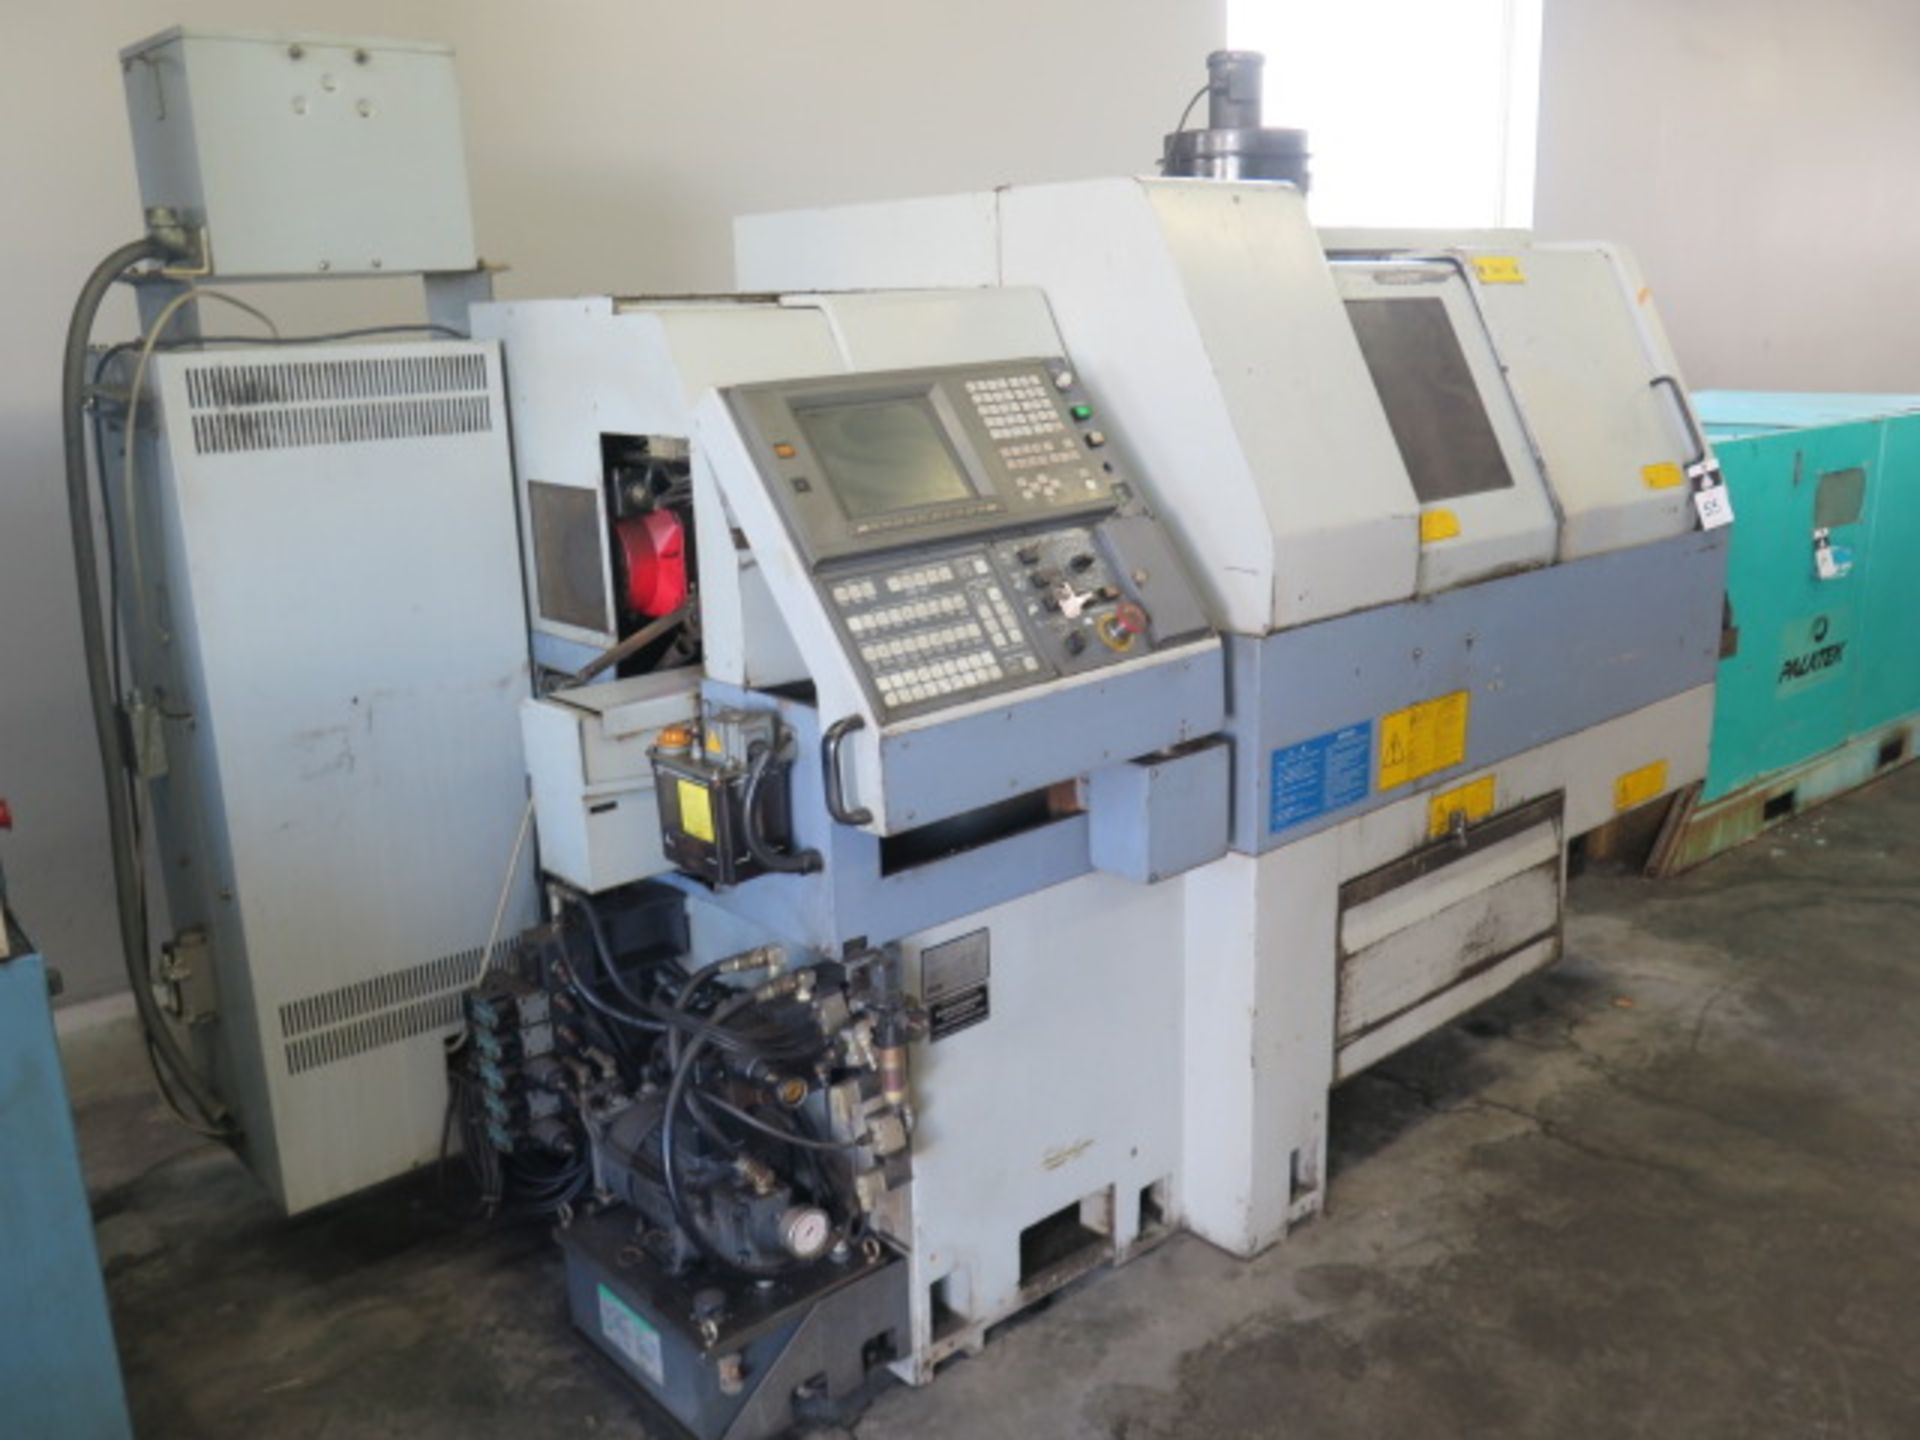 Star SV-20 CNC Swiss Type Automatic Lathe s/n 000823 w/ Fanuc Controls, Sub-Spindle, SOLD AS IS - Image 2 of 25